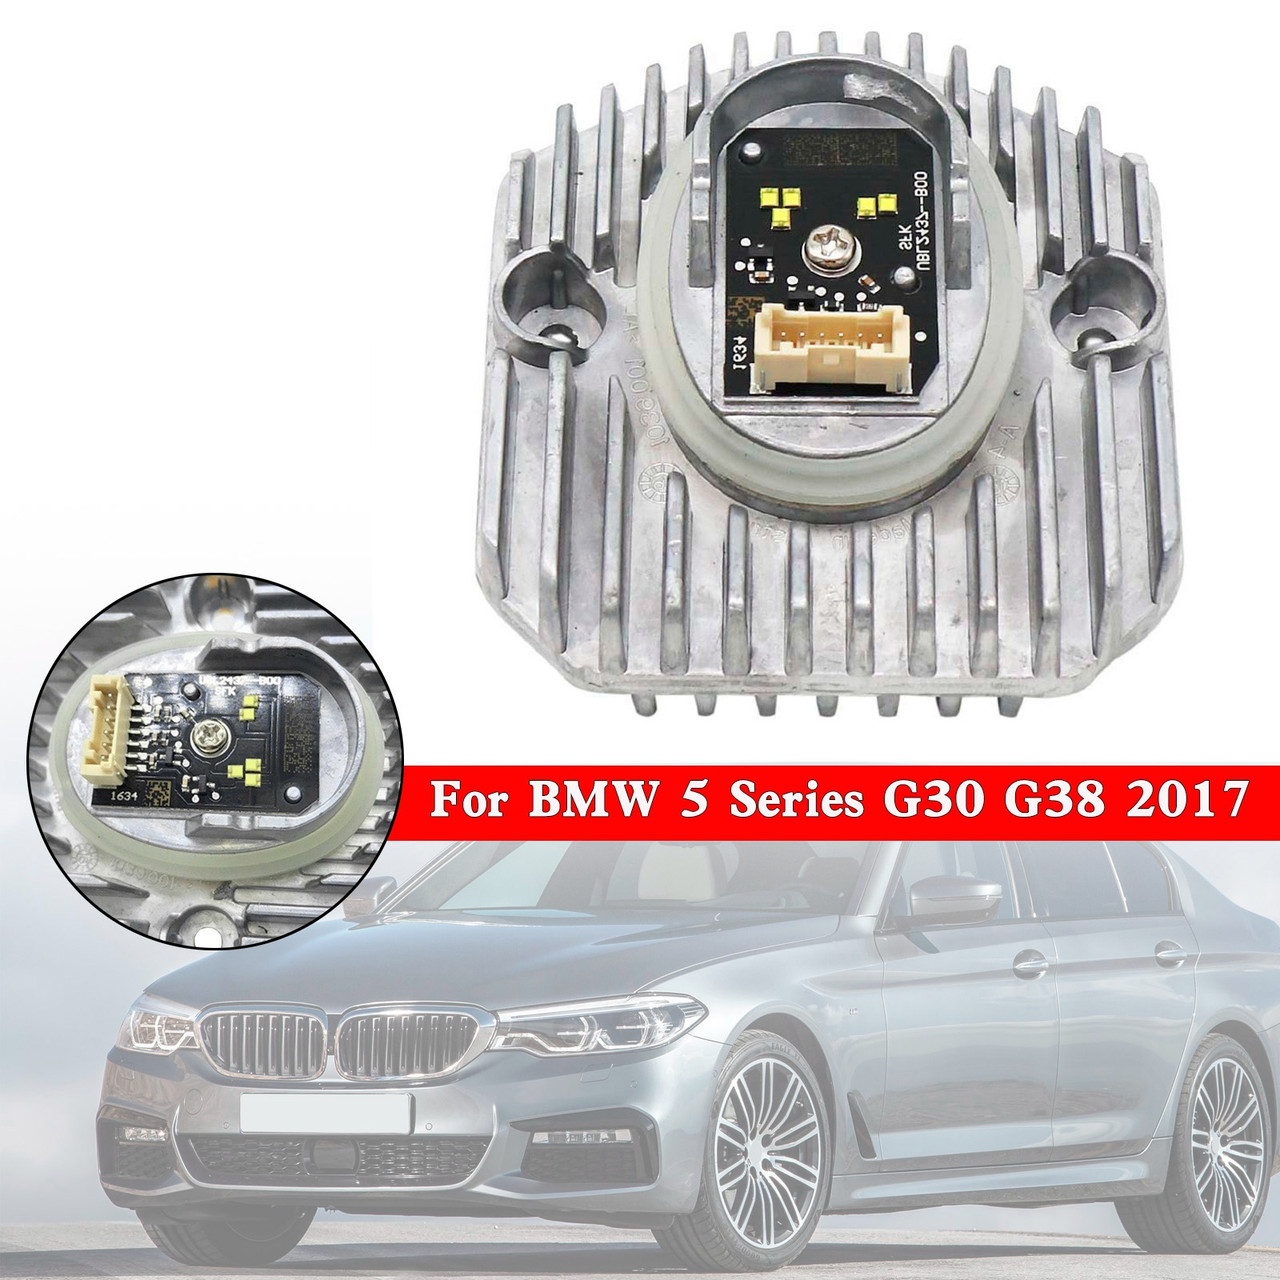 Right LED DRL Light Control Unit 63117214940 For BMW 5 Series G30 G38 2017-